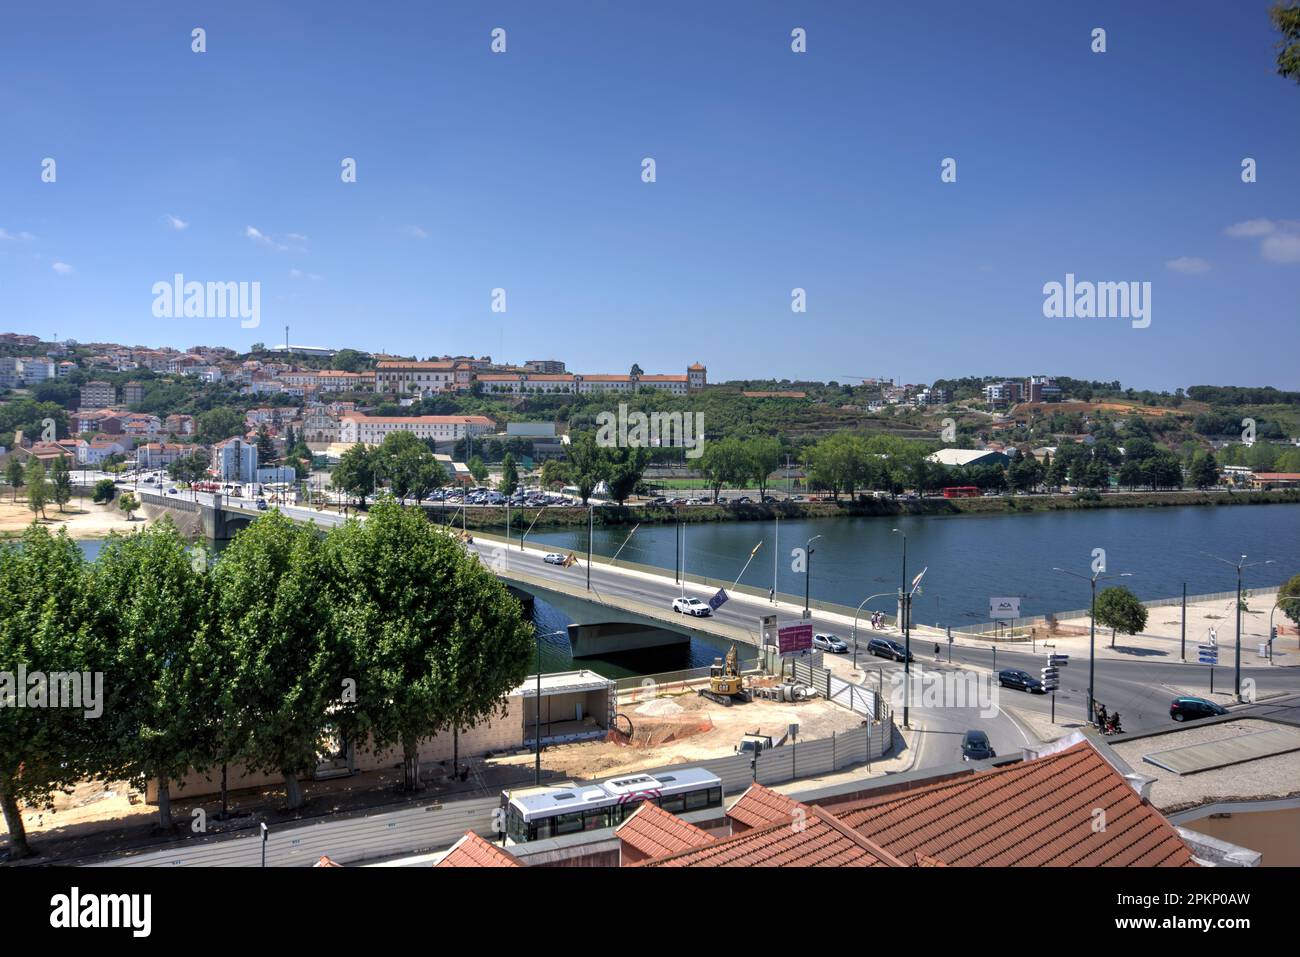 Coimbra, Portugal - August 15, 2022: View of Santa Clara Bridge from north-west side of River Mondego with city in background Stock Photo